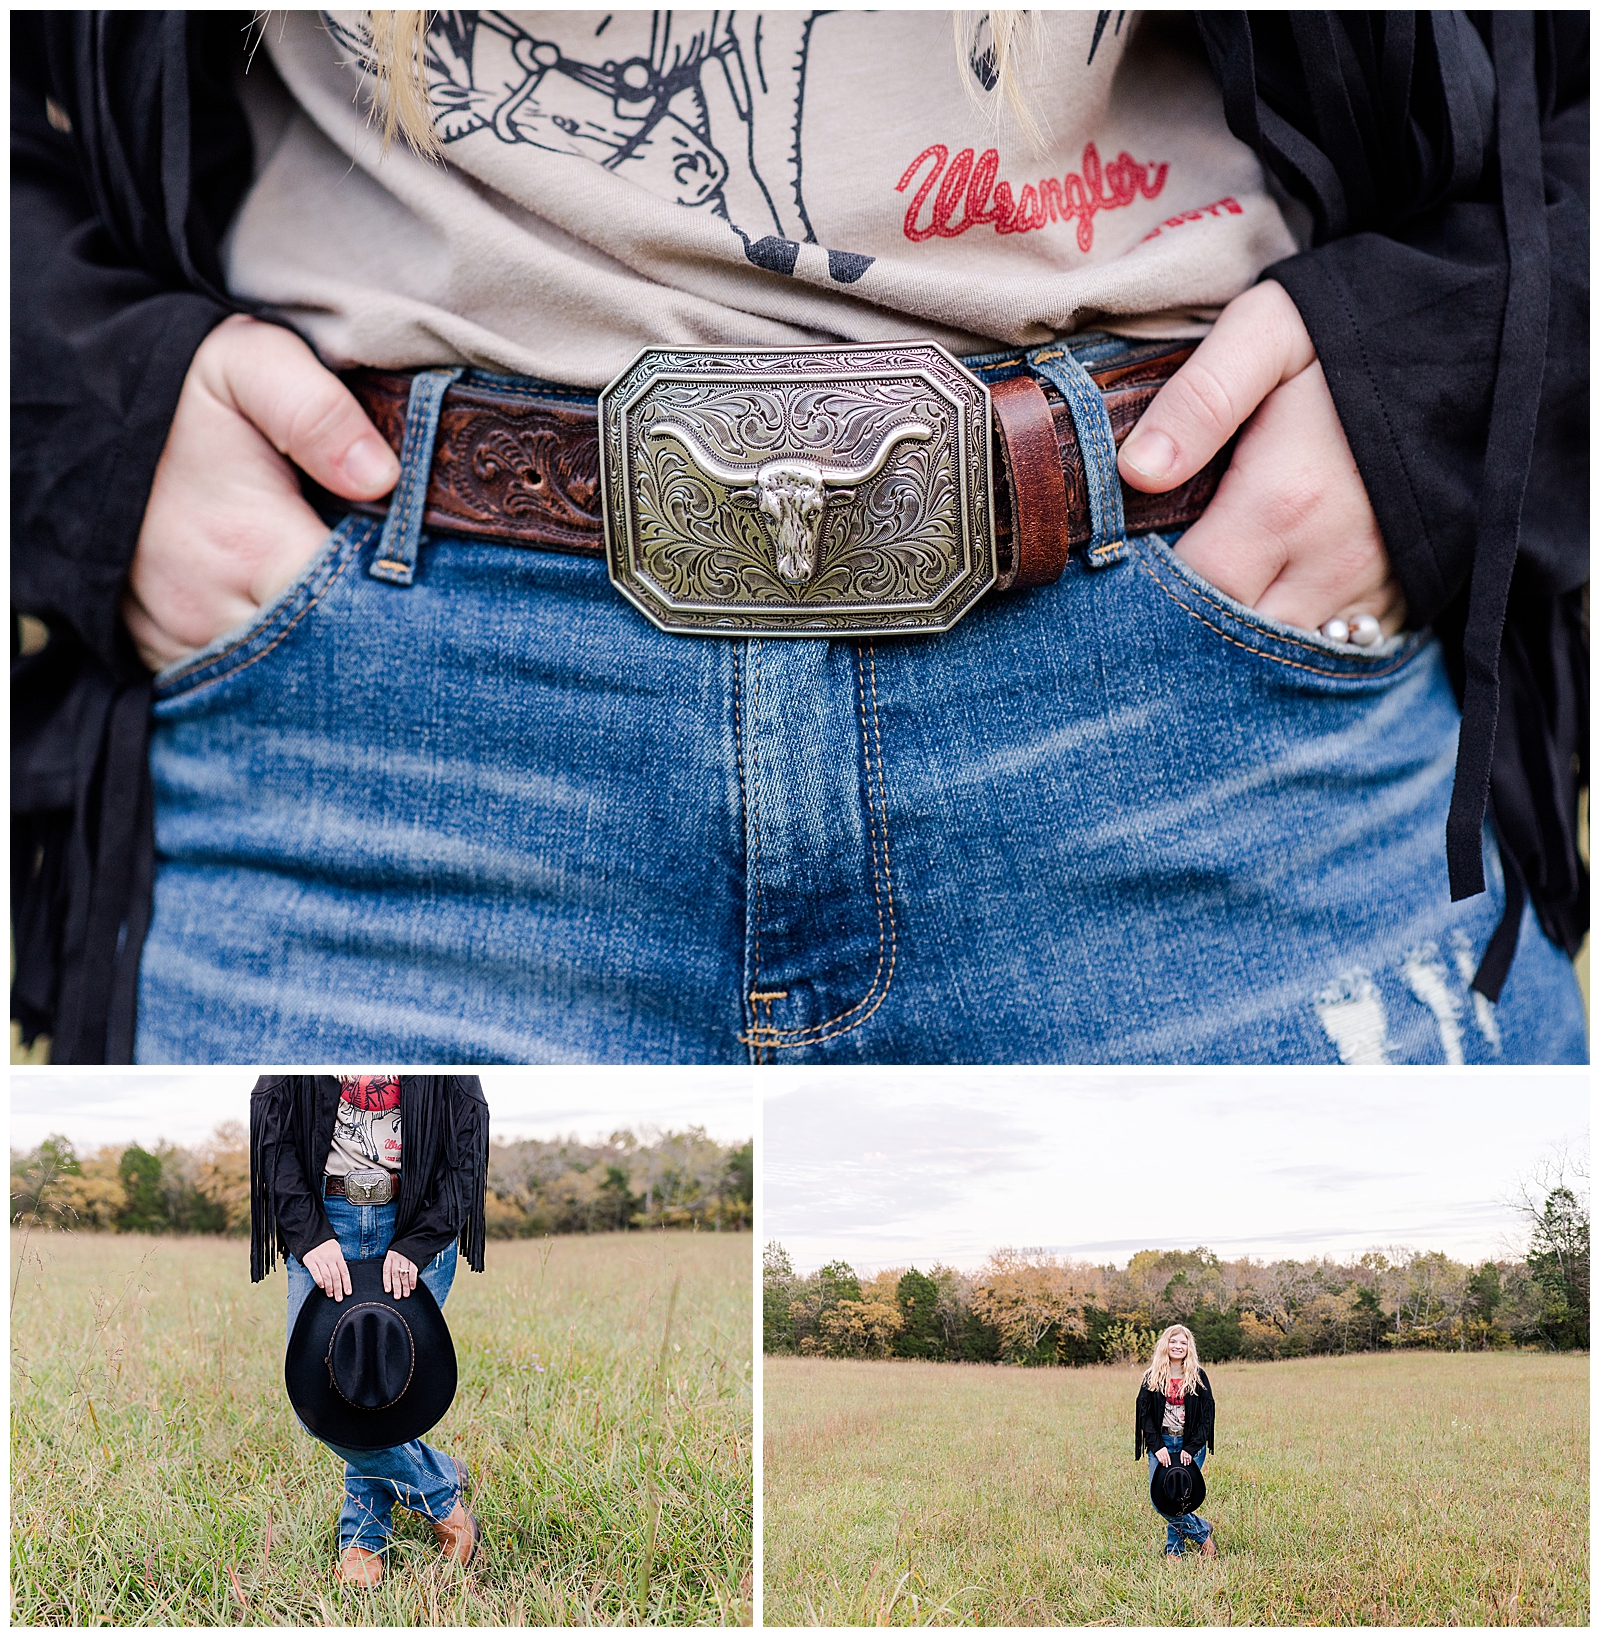 Nashville senior girl, wearing a black cowgirl hat, boots, and jeans, standing in an open field.